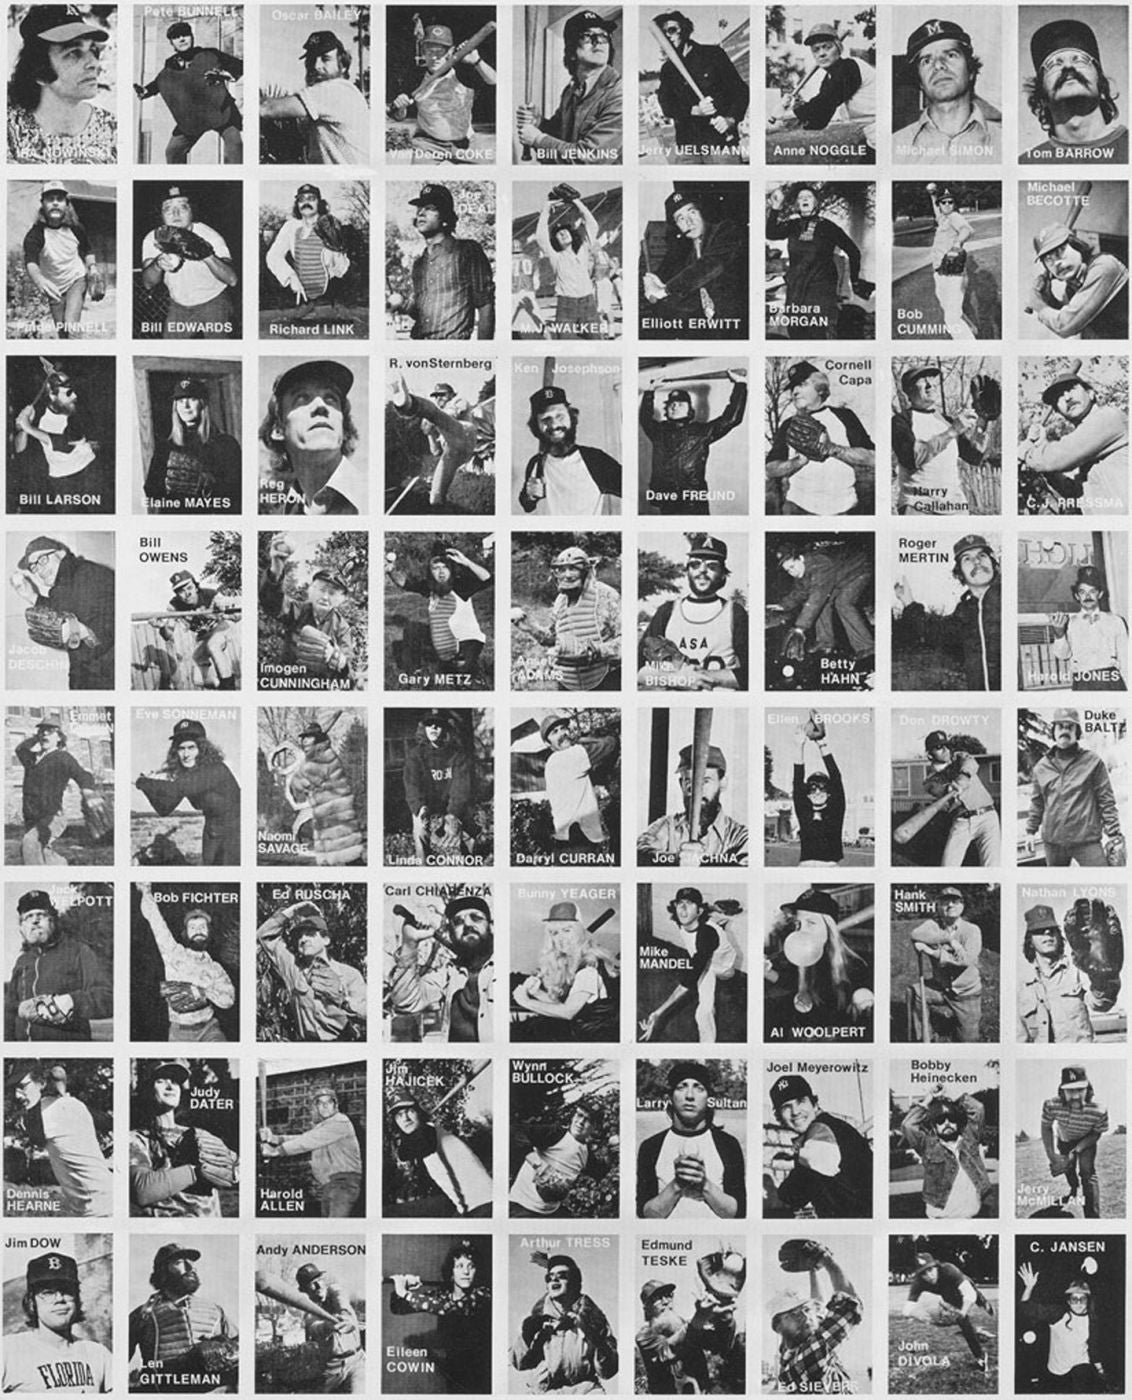 Mike Mandel: Set of 2 Uncut, Original Printed Sheets, Limited Edition of Untitled (Baseball-Photographer Trading Cards with Additional Printed Postcards) [SIGNED]